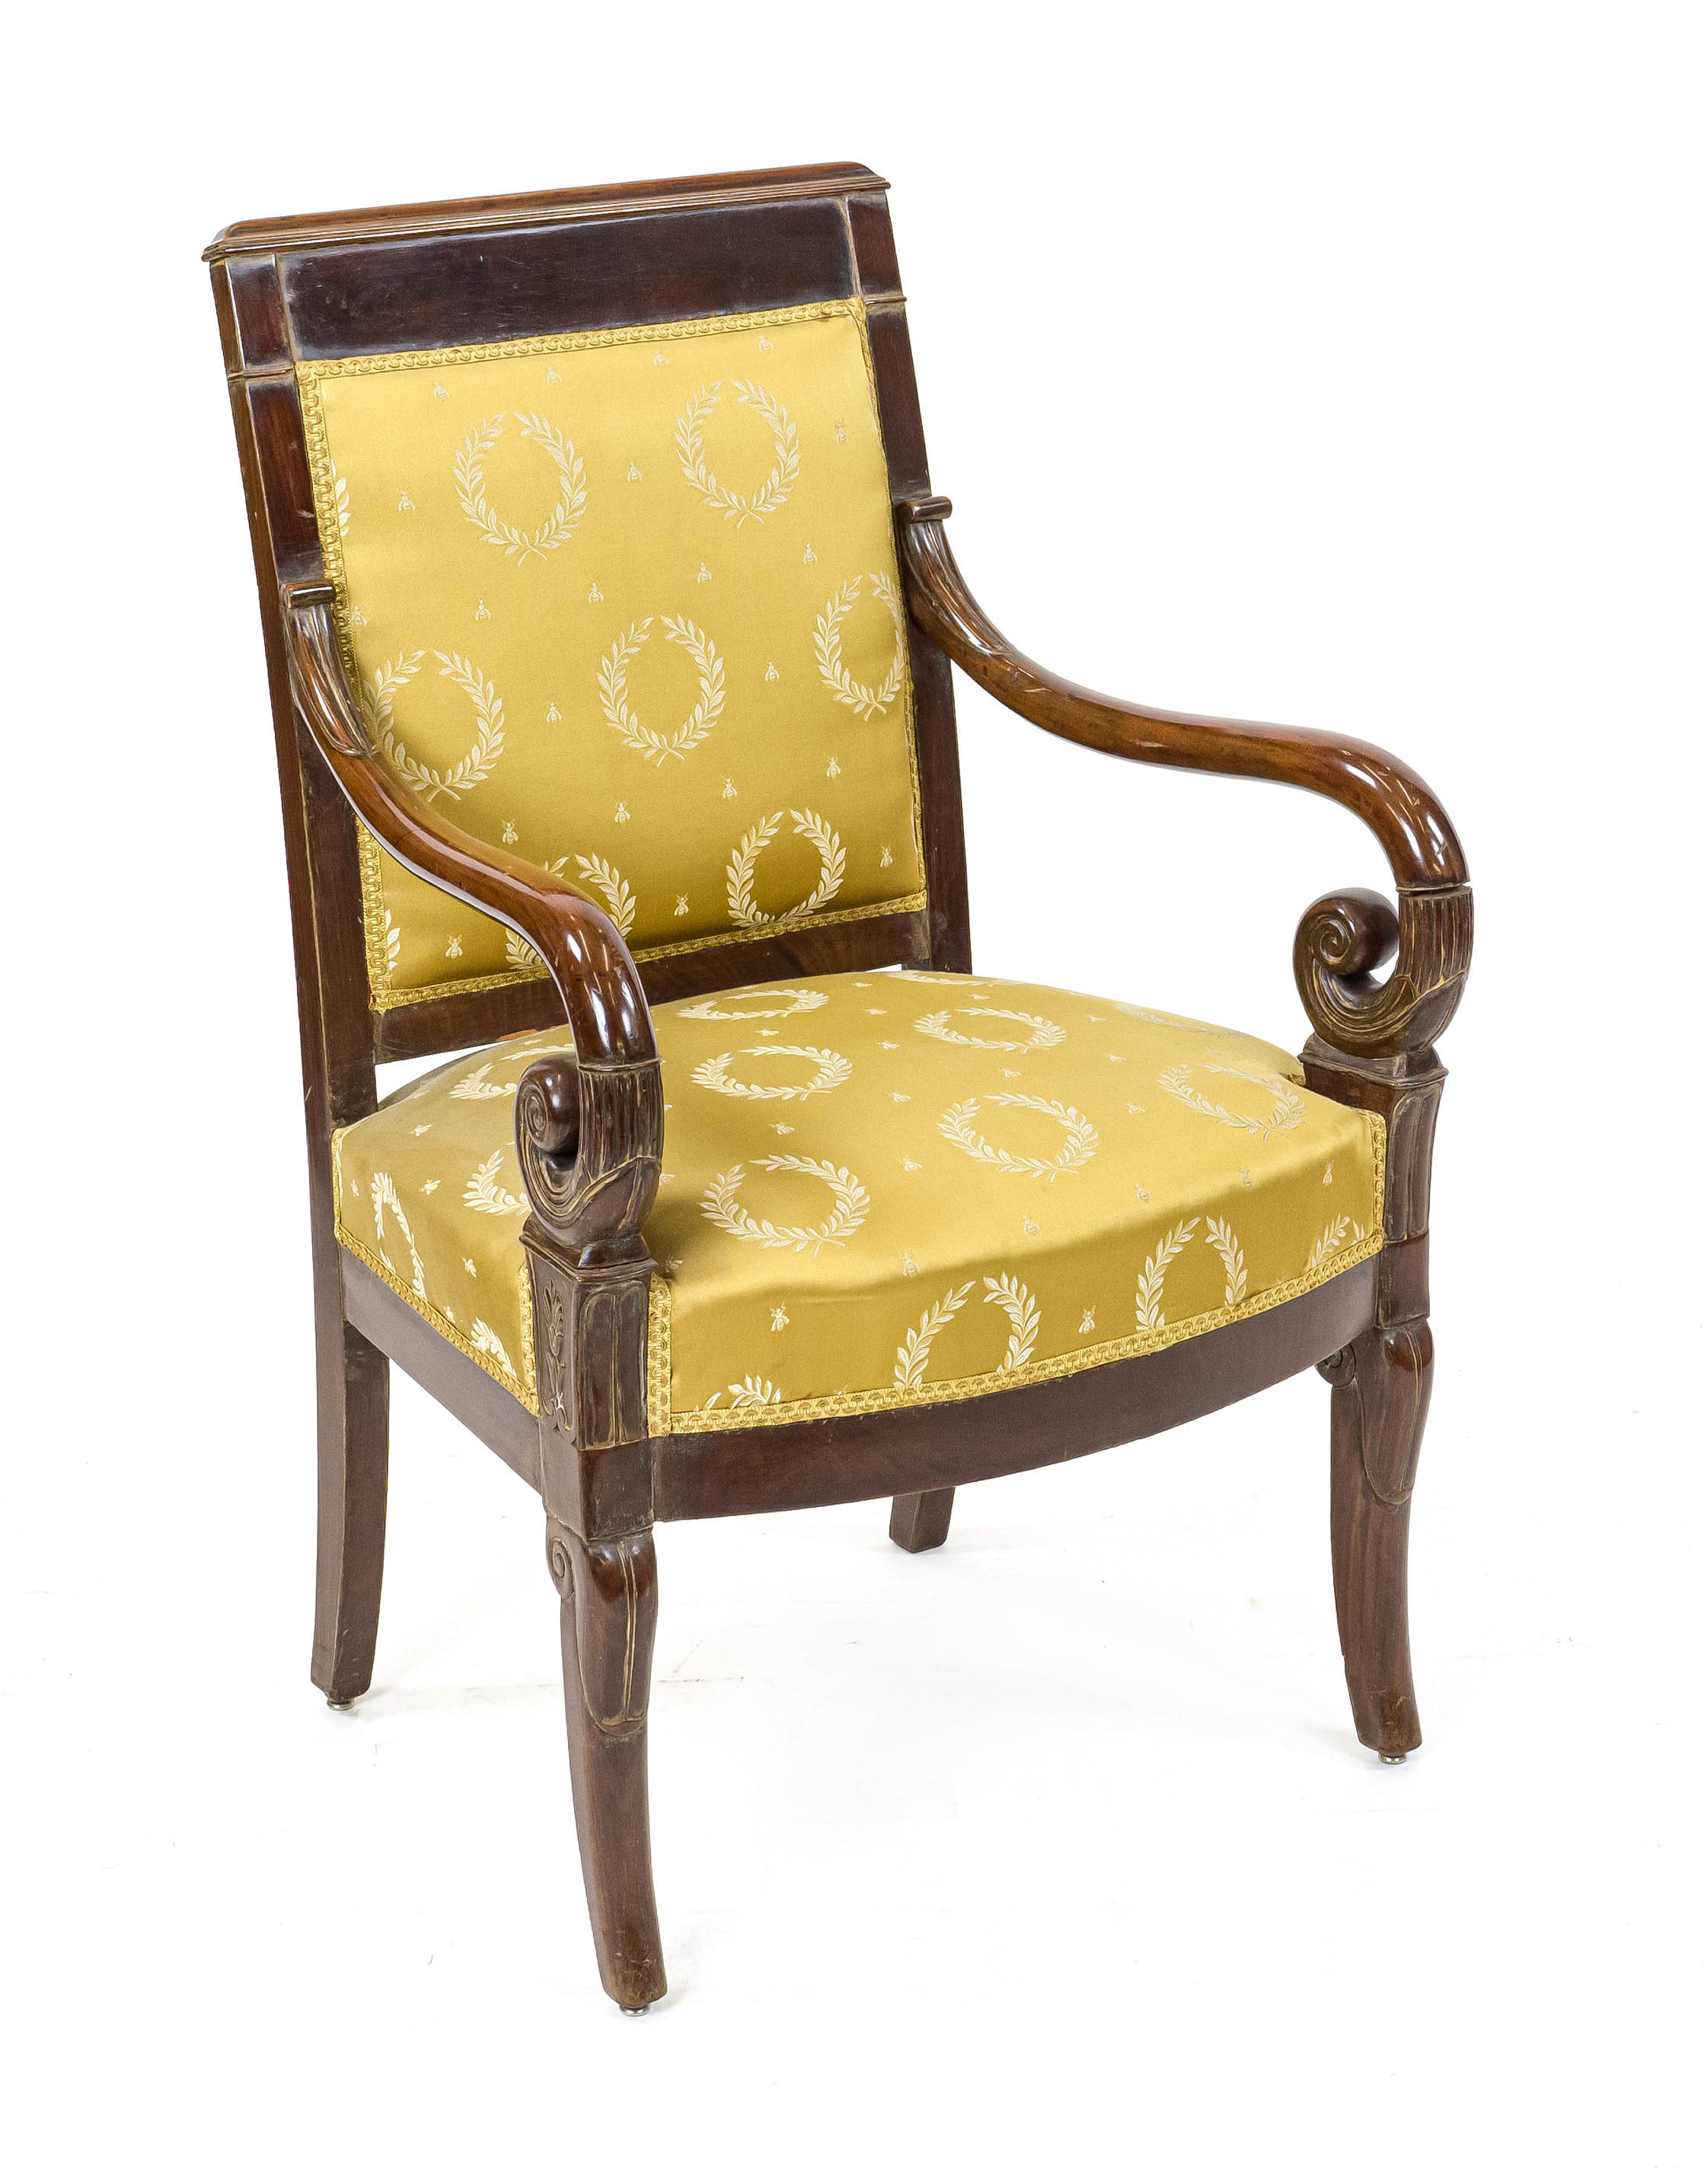 Empire armchair, circa 1820, mahogany, partly carved, yellow upholstery, 95 x 63 x 50 cm - This